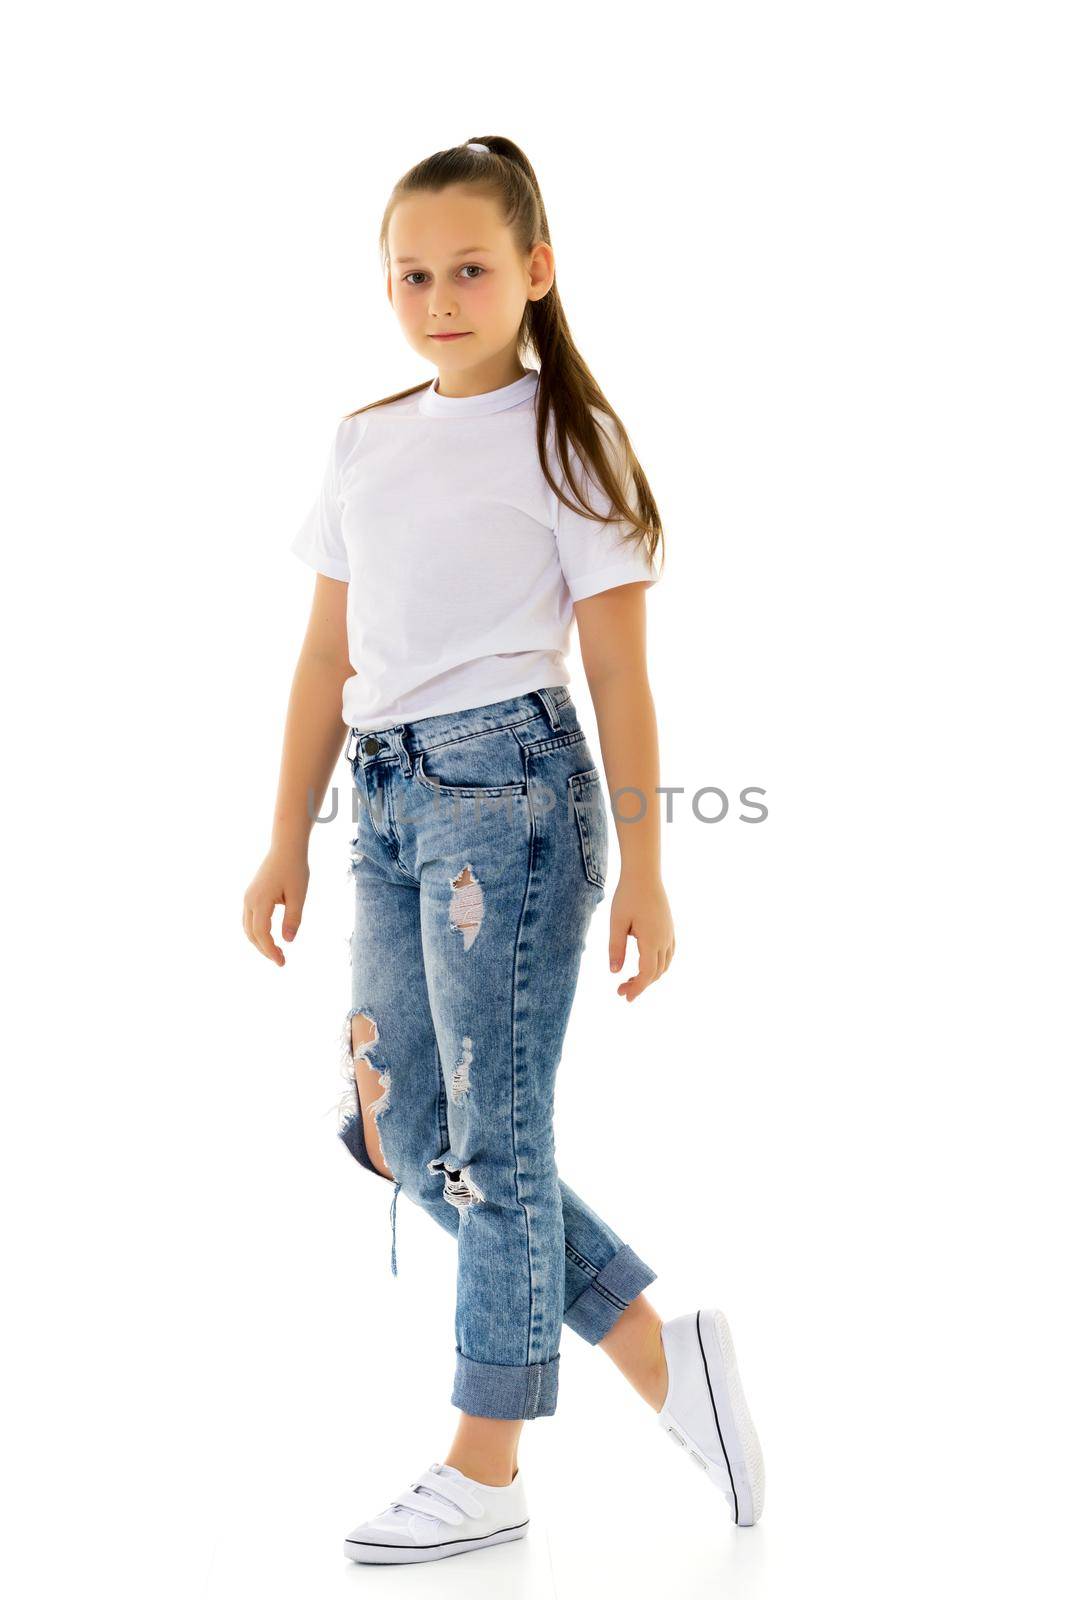 Portrait of a little girl close-up, in a clean white T-shirt and jeans. On the shirt you can put a logo or any other inscription.